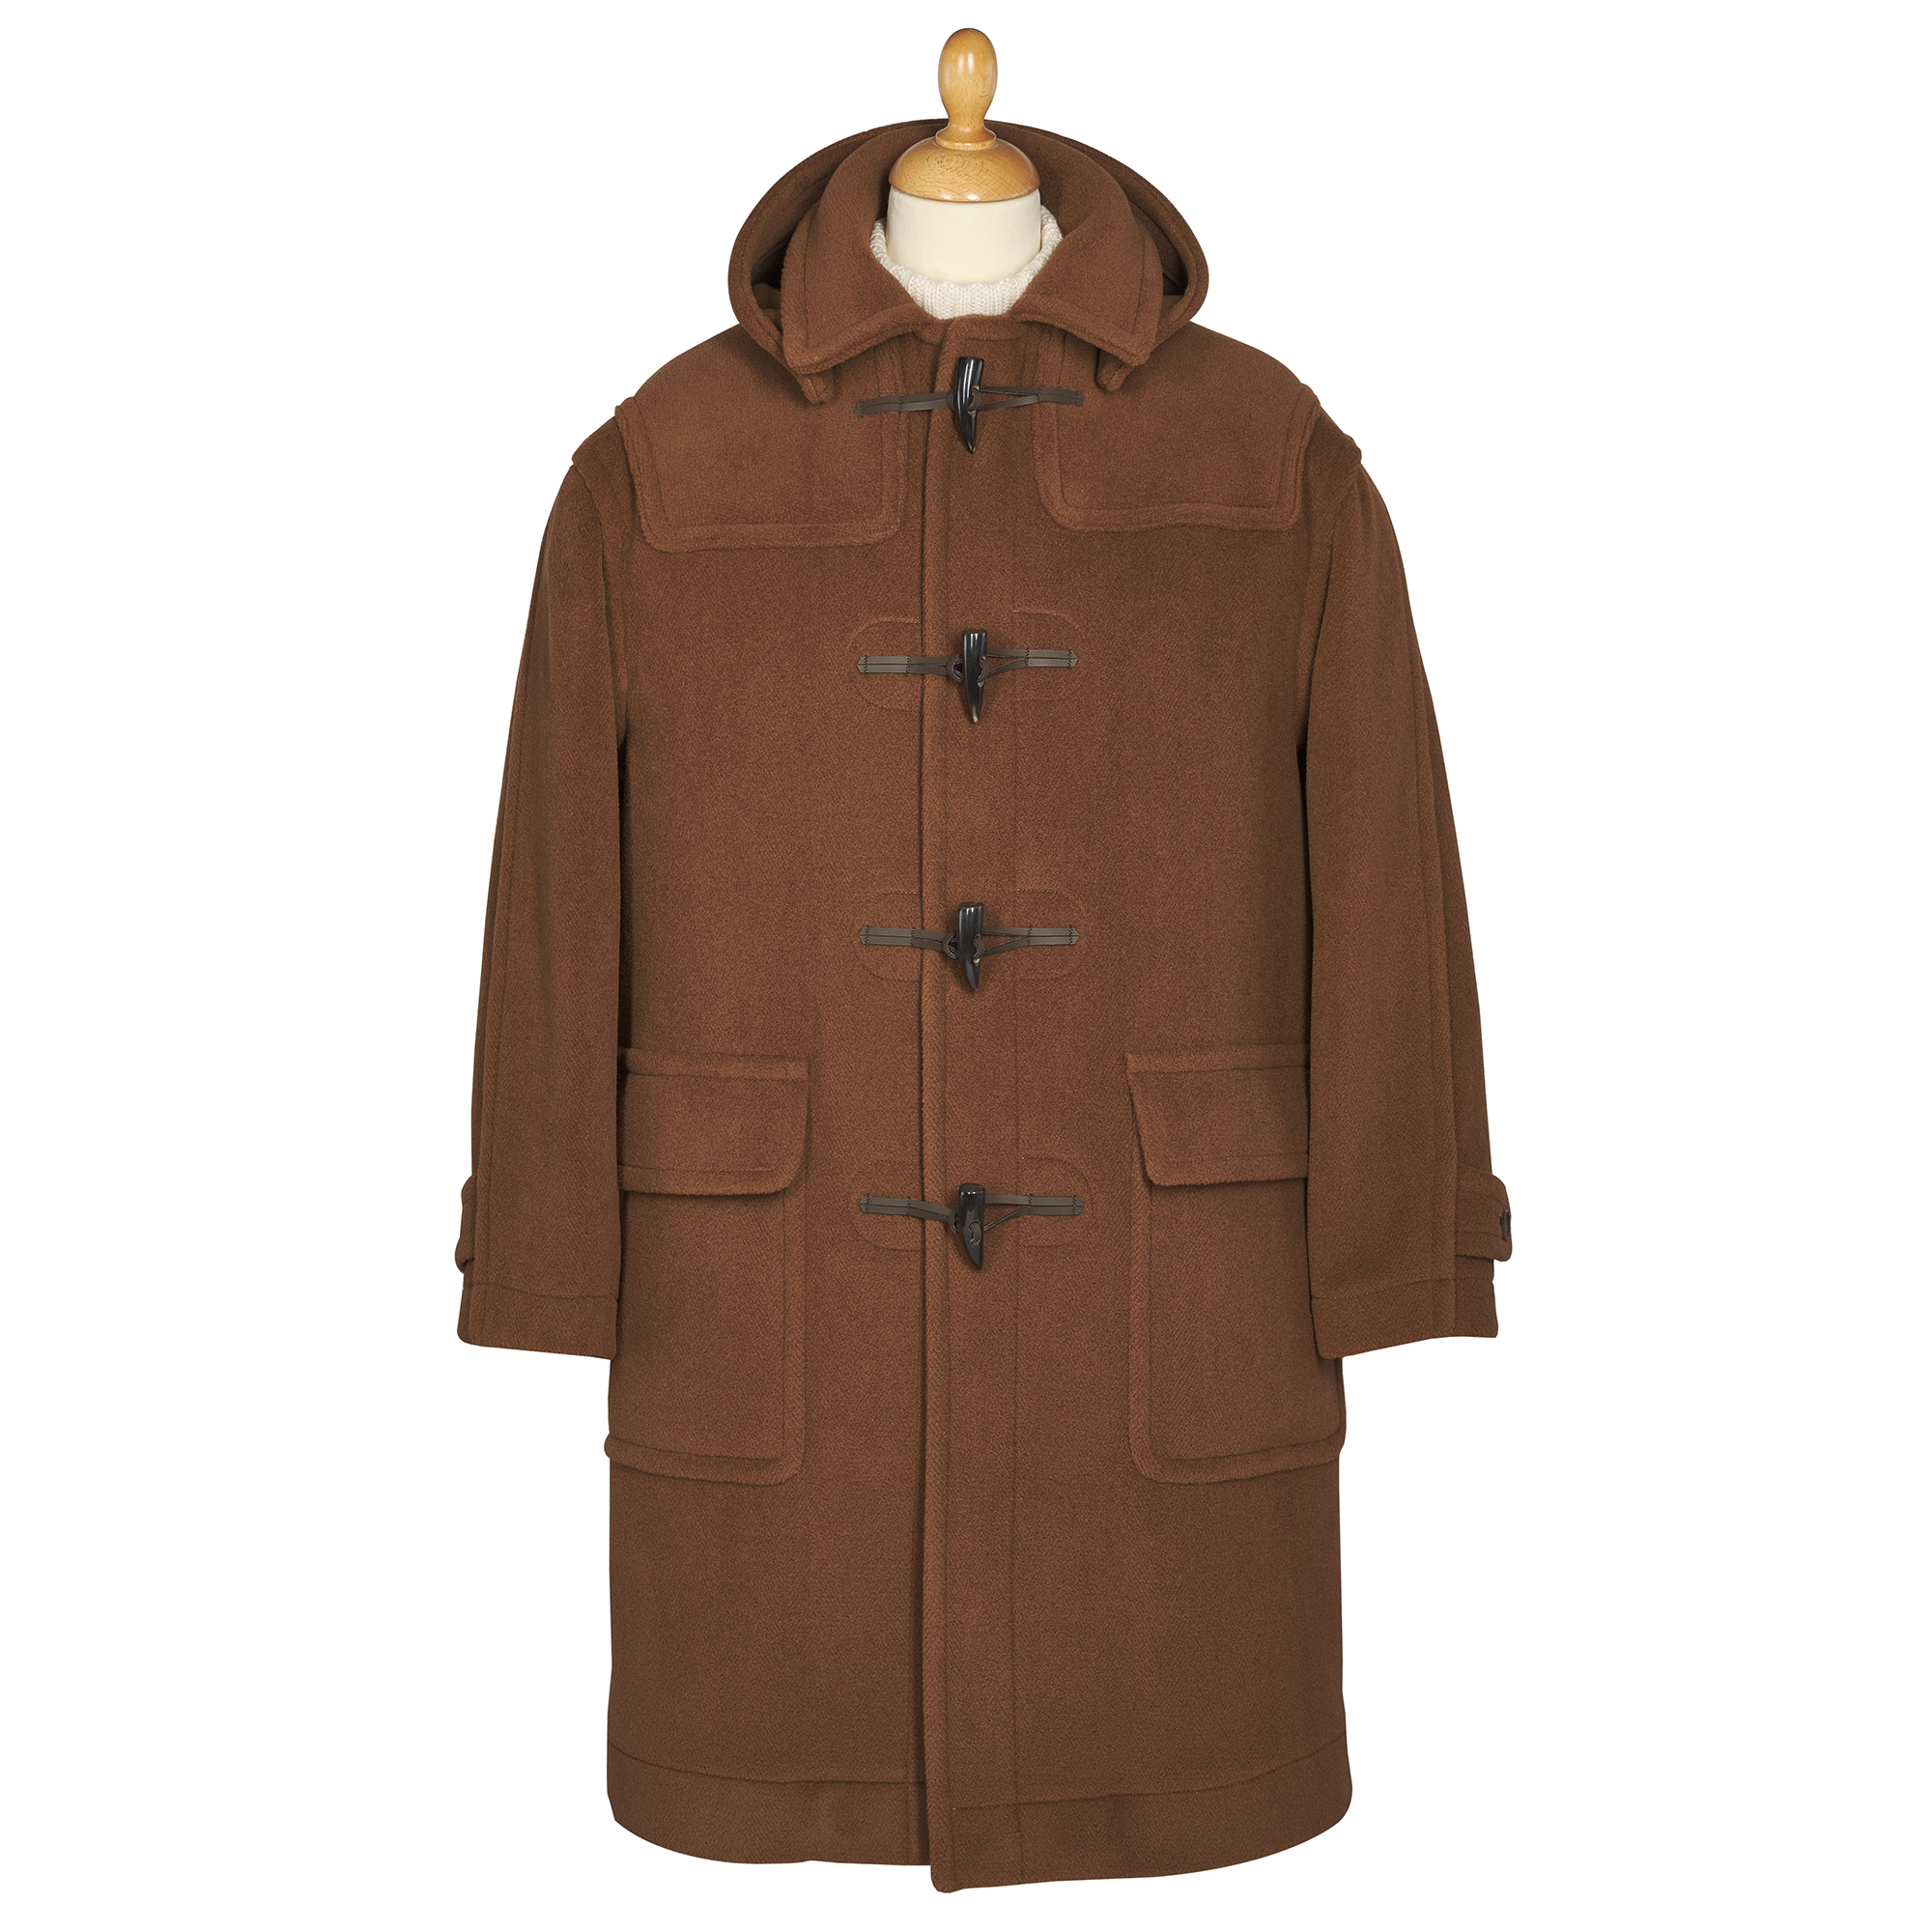 British Made Loden Duffle Coat | Men's Country Clothing | Cordings